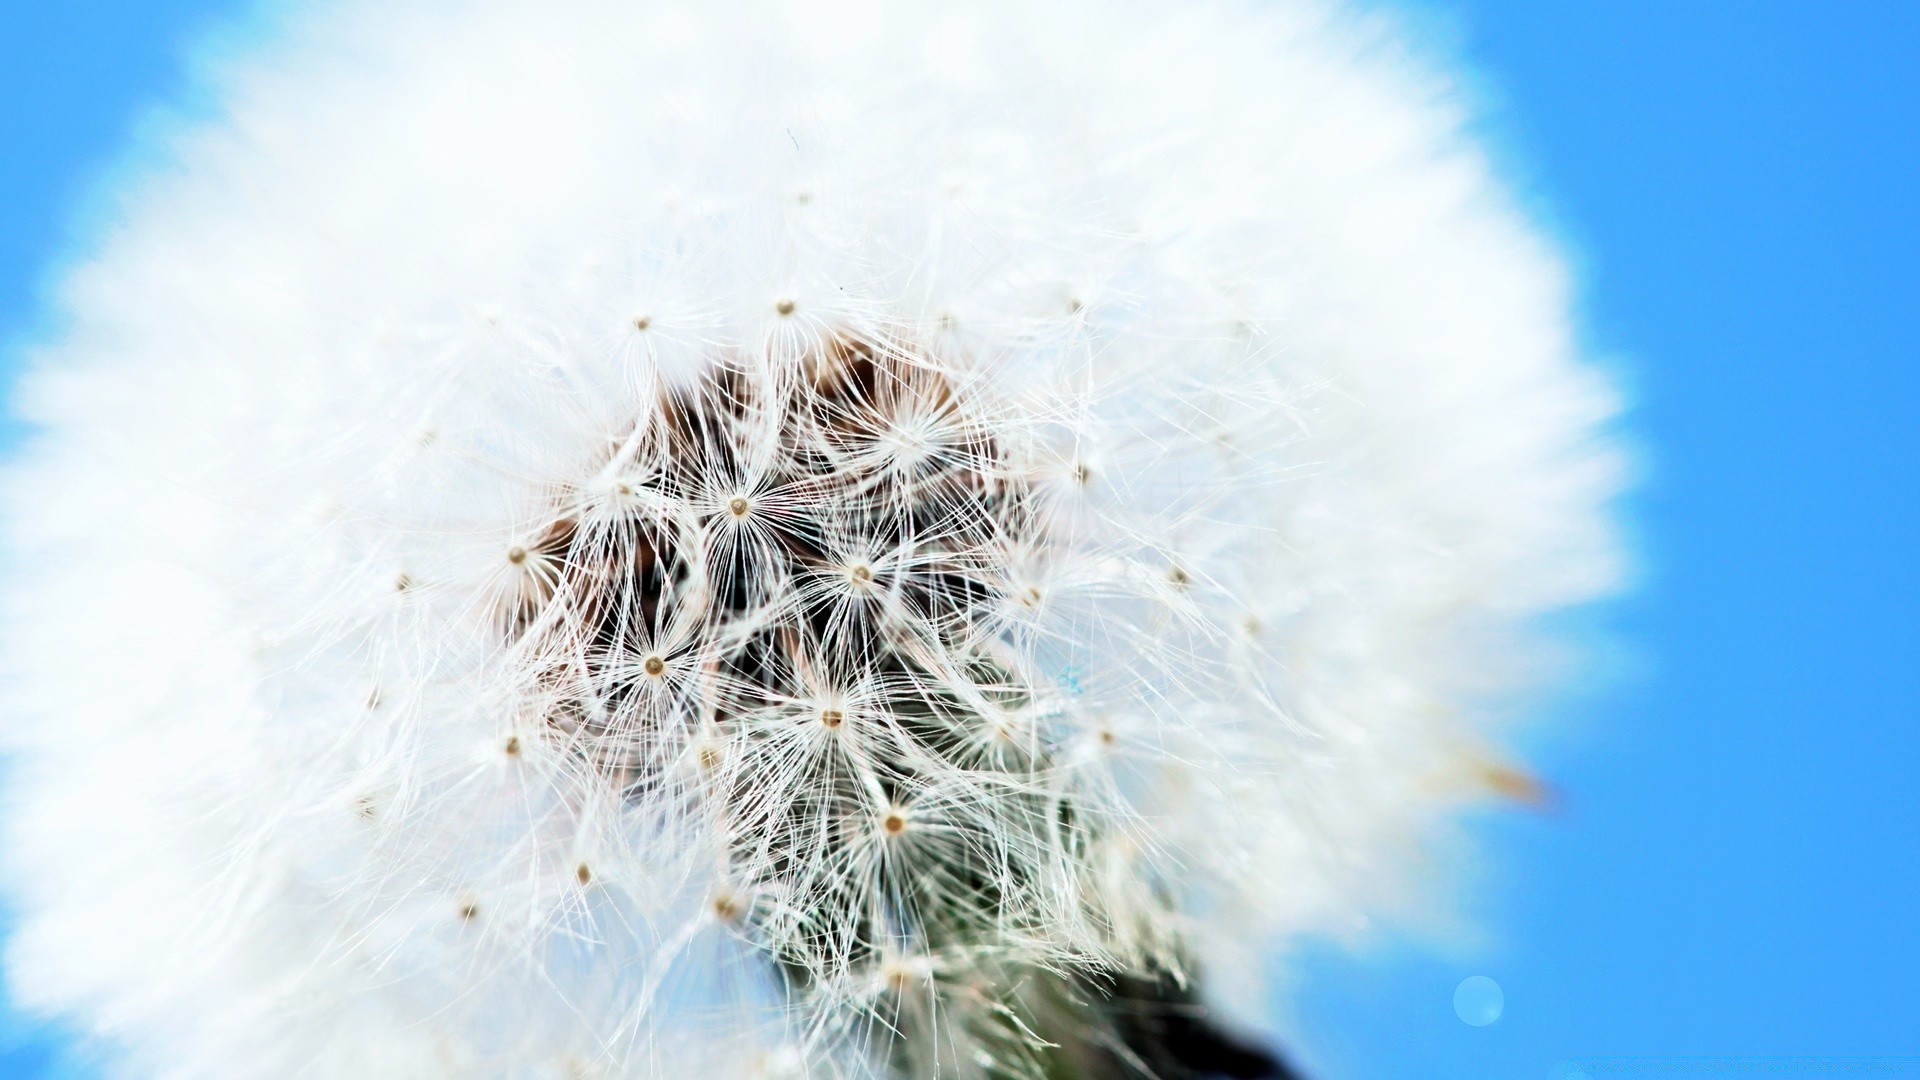 macro dandelion nature downy bright season summer flora growth sky outdoors seed winter frost color snow light flower close-up festival